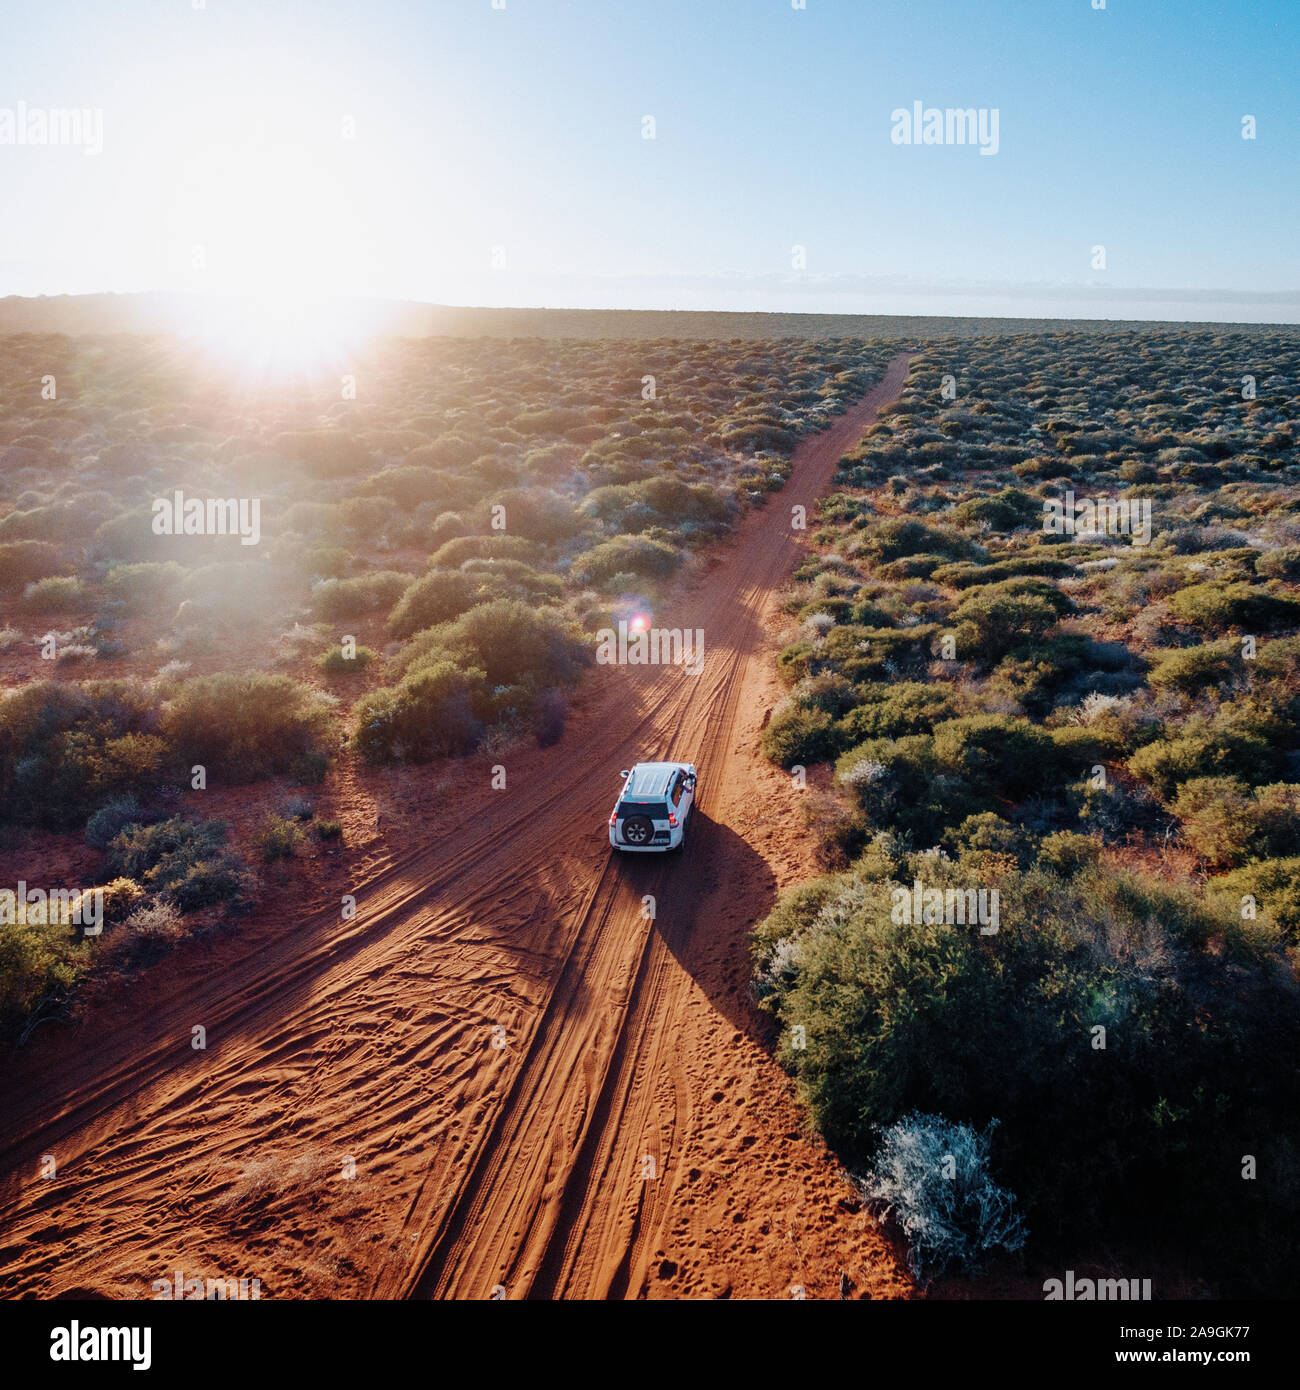 Off road desert adventure, car and tracks on sand in the Australian Outback. Stock Photo